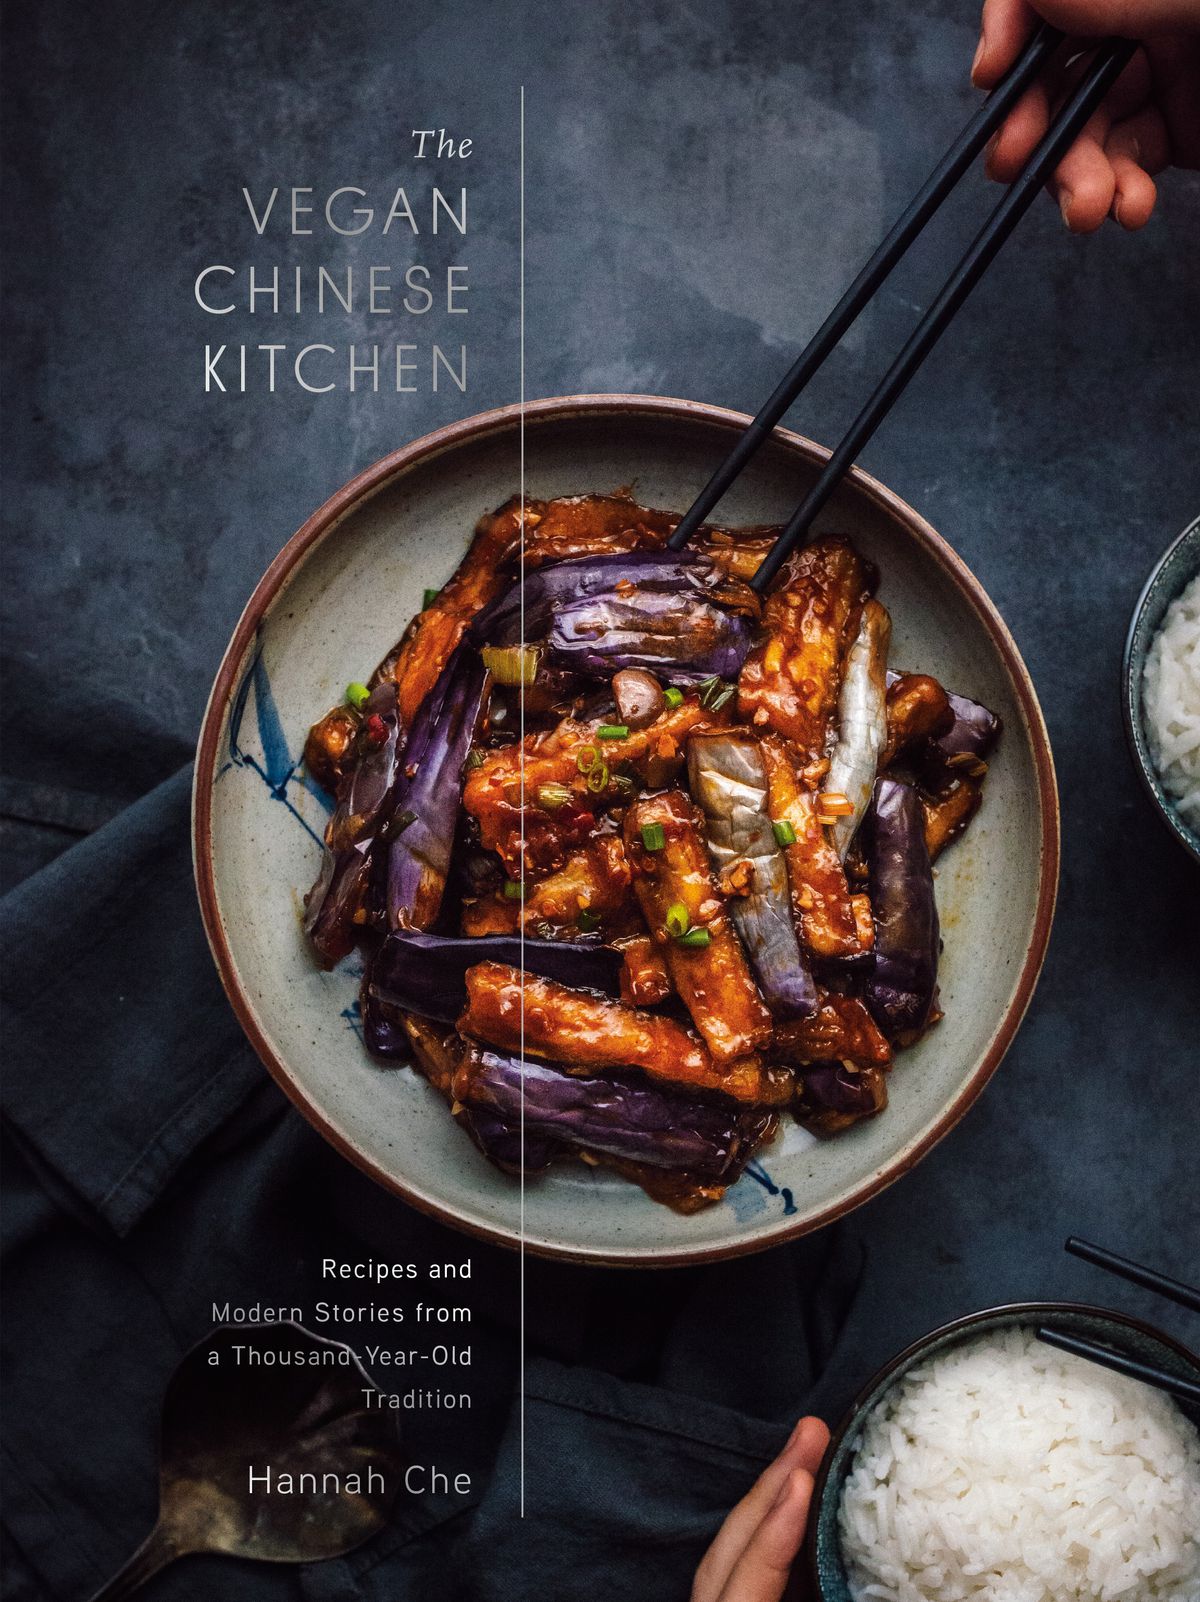 The cover of the Vegan Chinese Kitchen featuring a bowl of eggplant